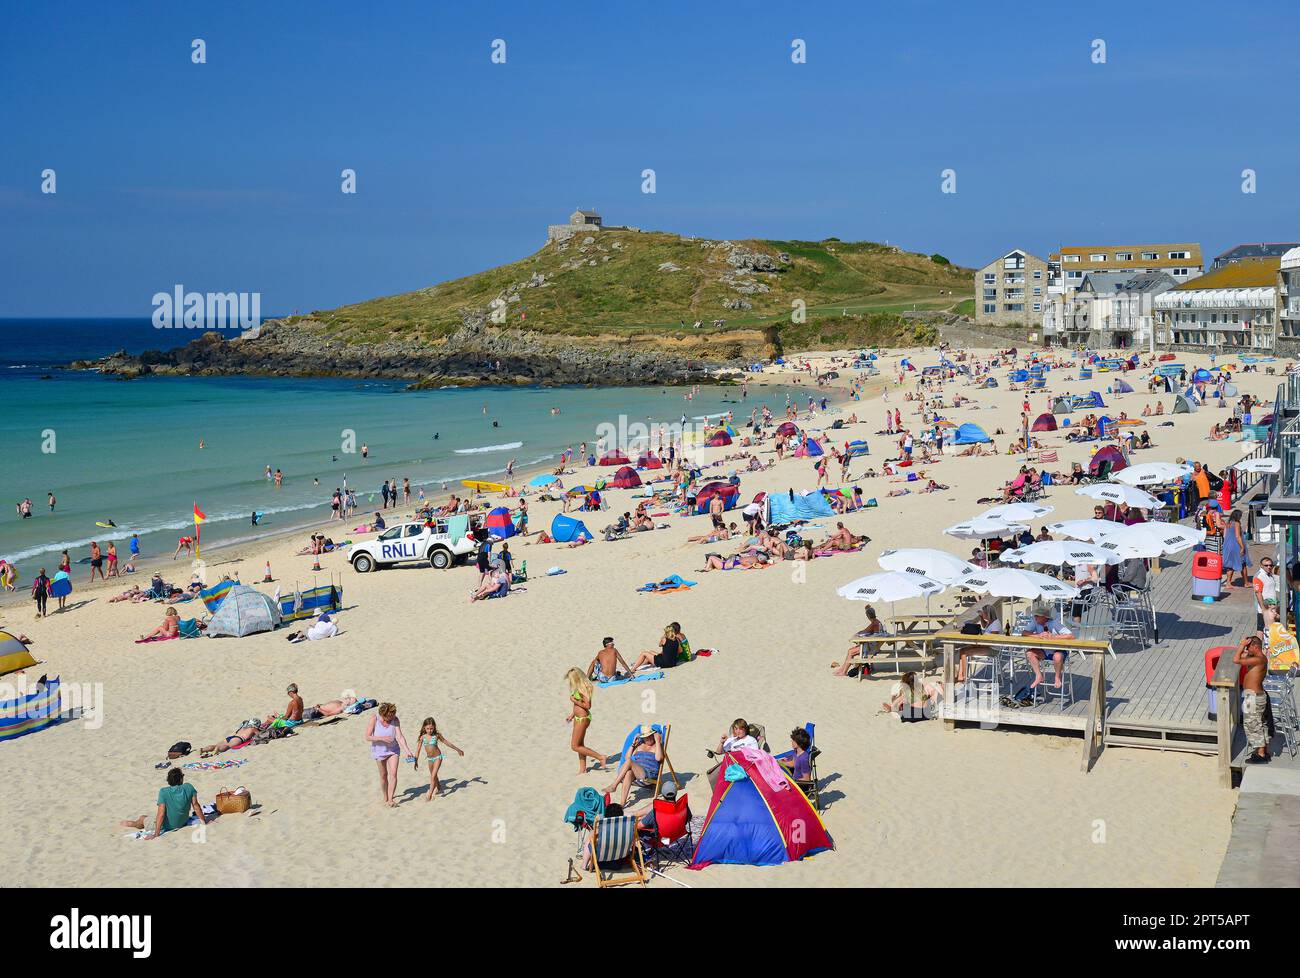 Porthmeor Beach, St Ives, Cornwall, Angleterre, Royaume-Uni Banque D'Images